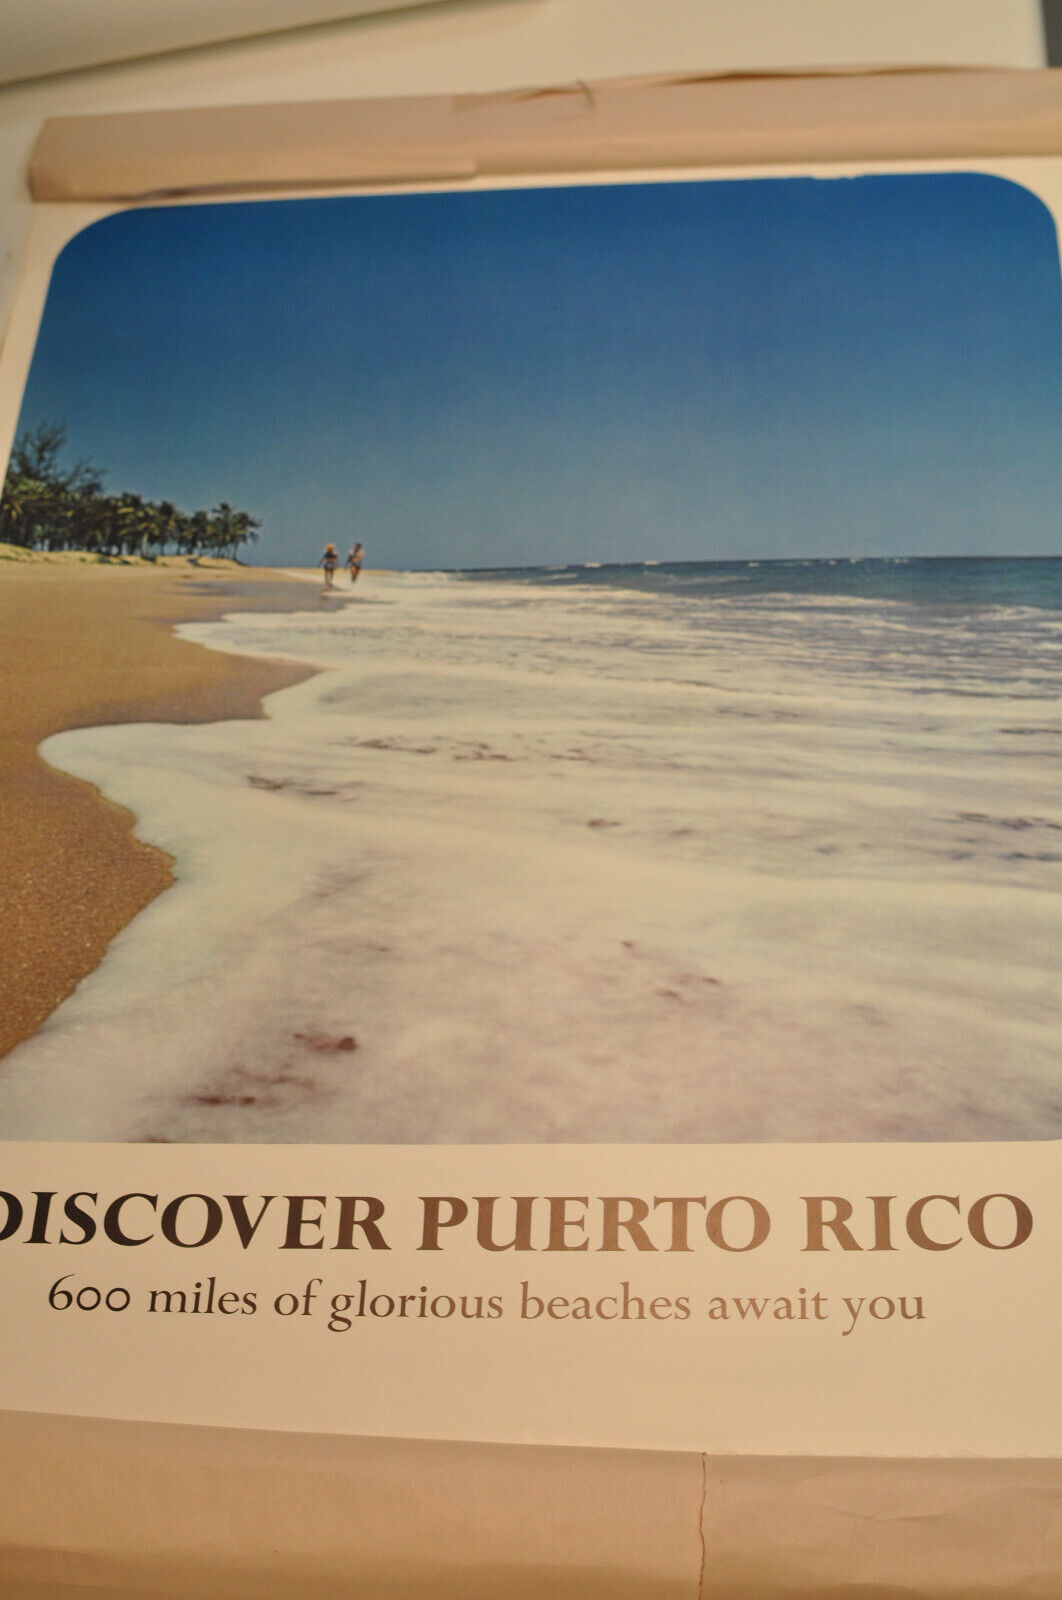 c.1960s Discover Puerto Rico 600 miles of glorious beaches await - Travel Poster